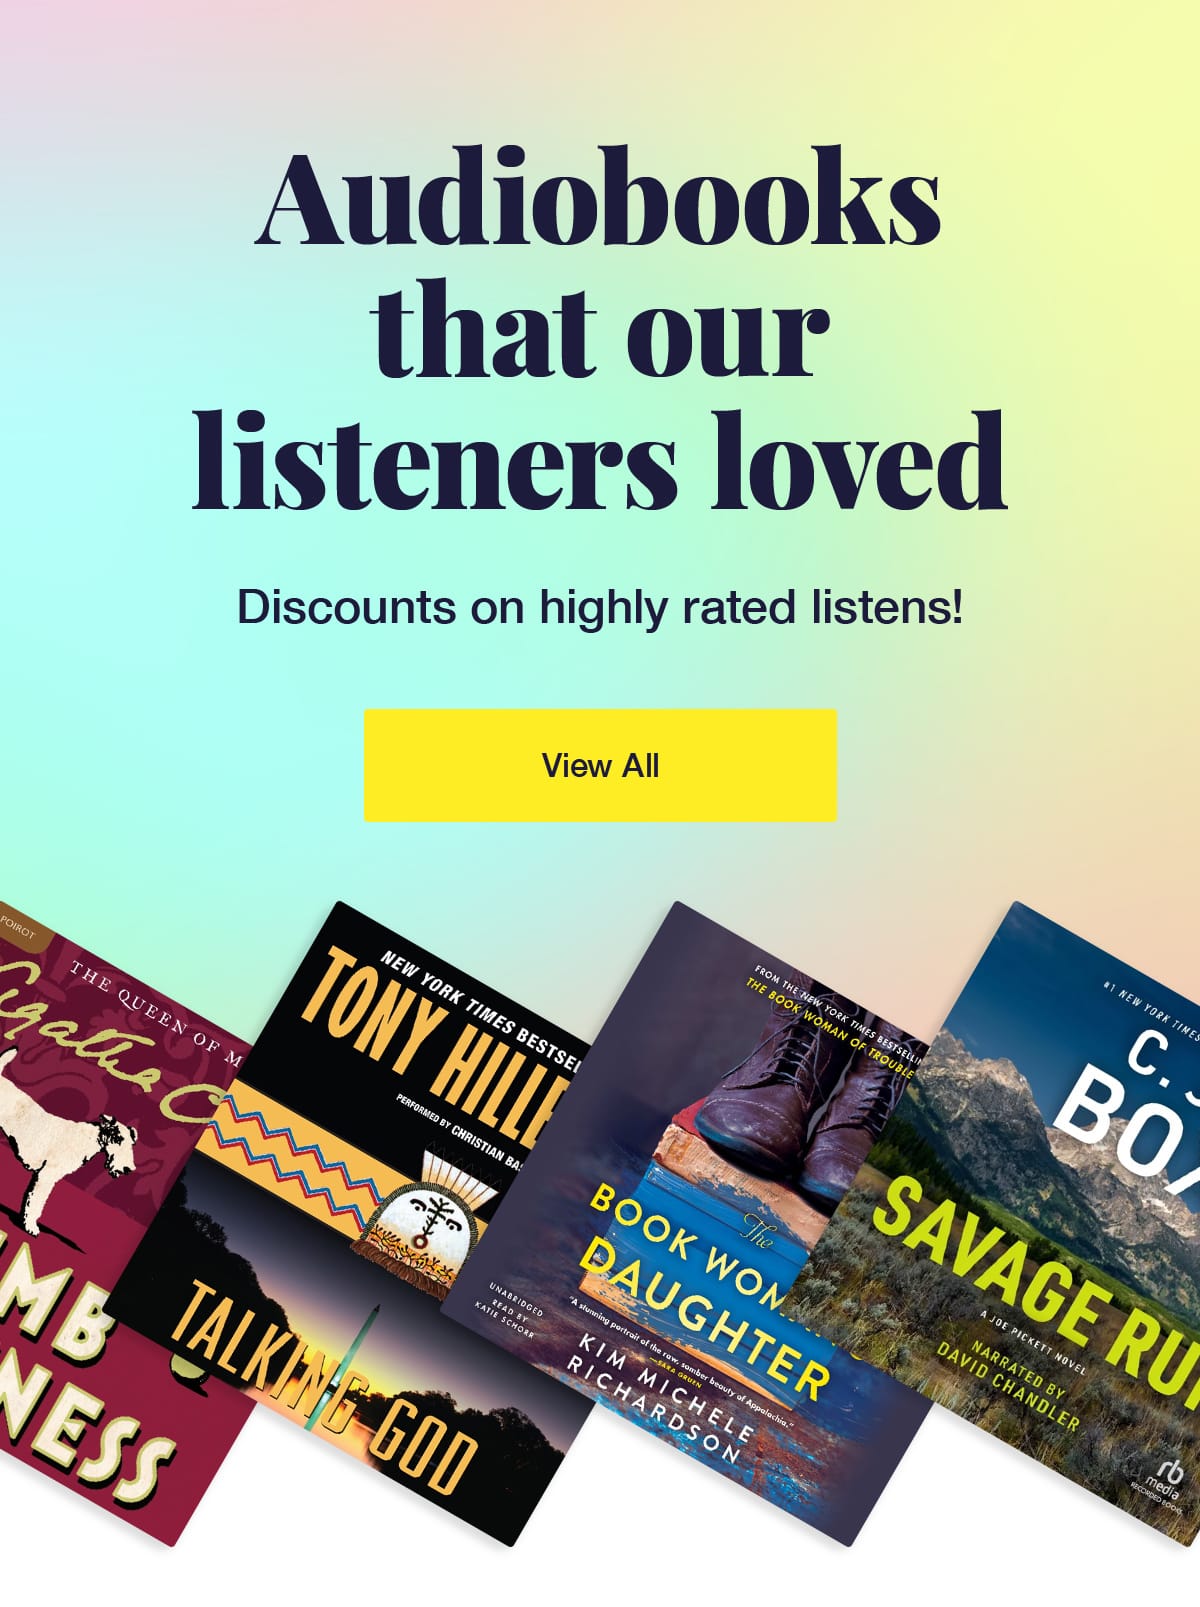 Audiobooks that our listeners loved